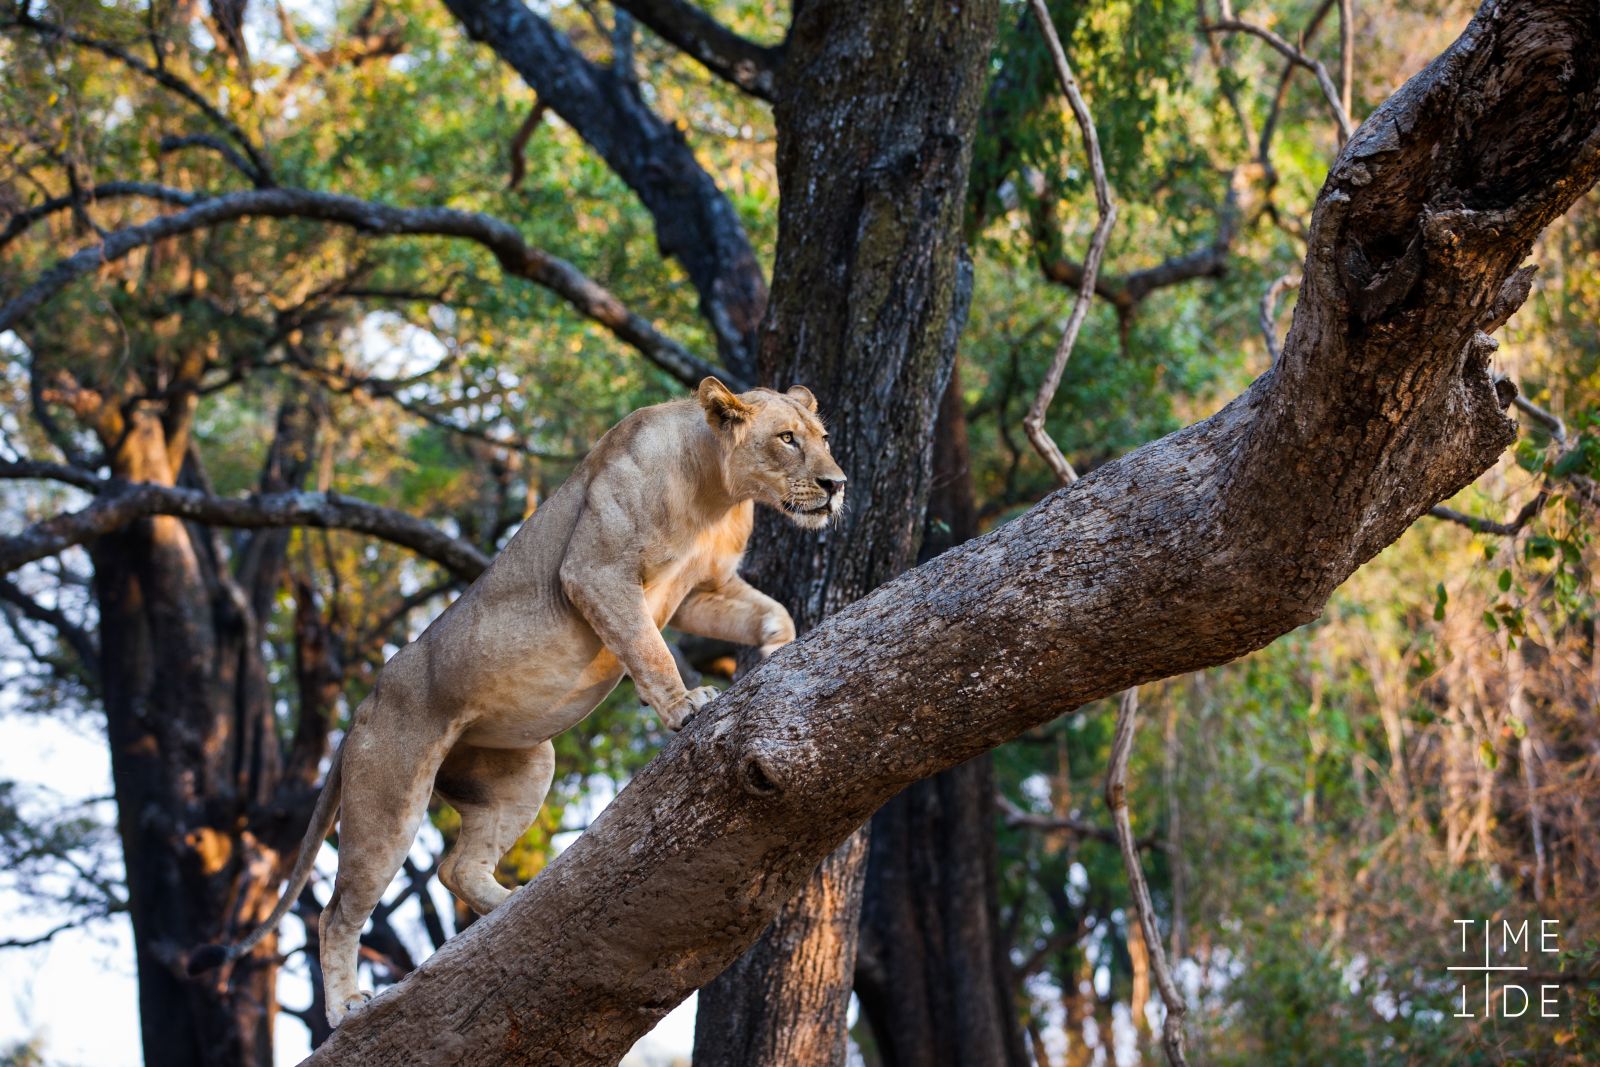 Lioness climbing a tree in the South Luangwa National Park, Zambia